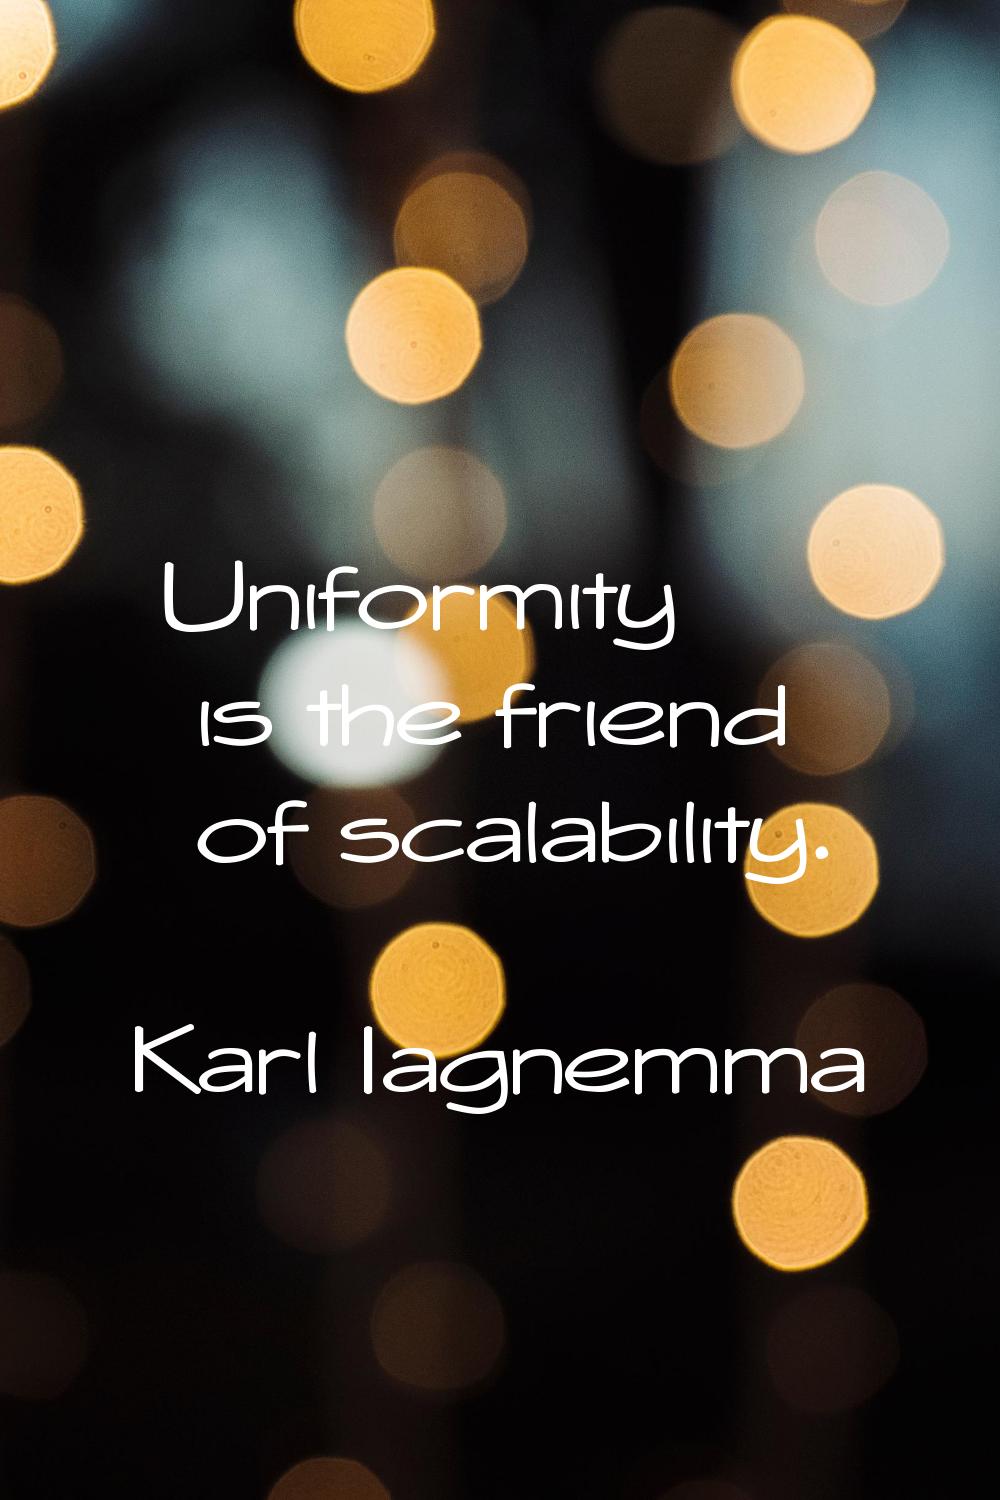 Uniformity is the friend of scalability.